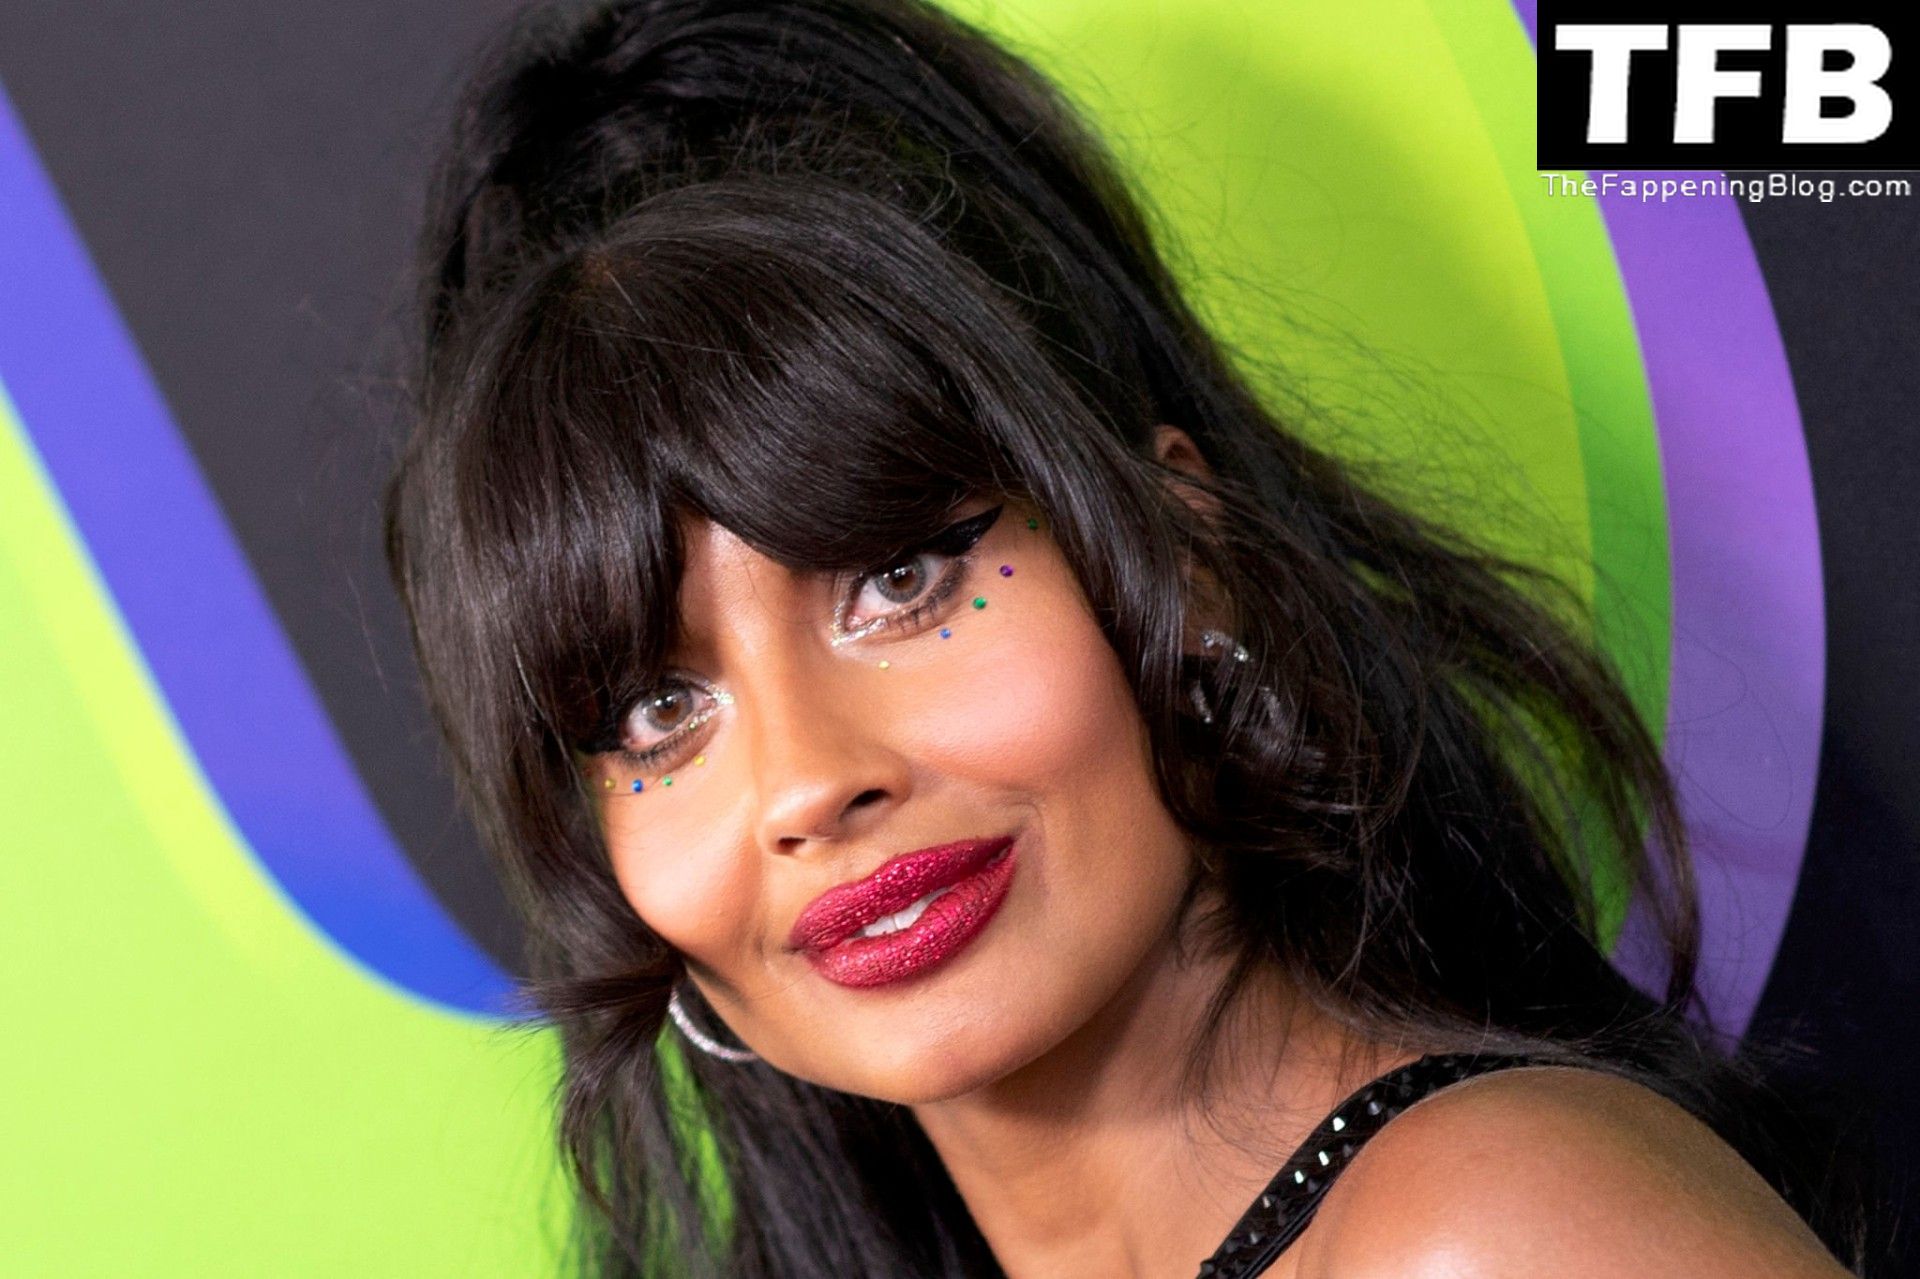 Jameela Jamil Sexy The Fappening Blog 49 - Jameela Jamil Flaunts Her Big Tits at the Premiere of Disney+’s “She Hulk: Attorney at Law” in LA (53 Photos)